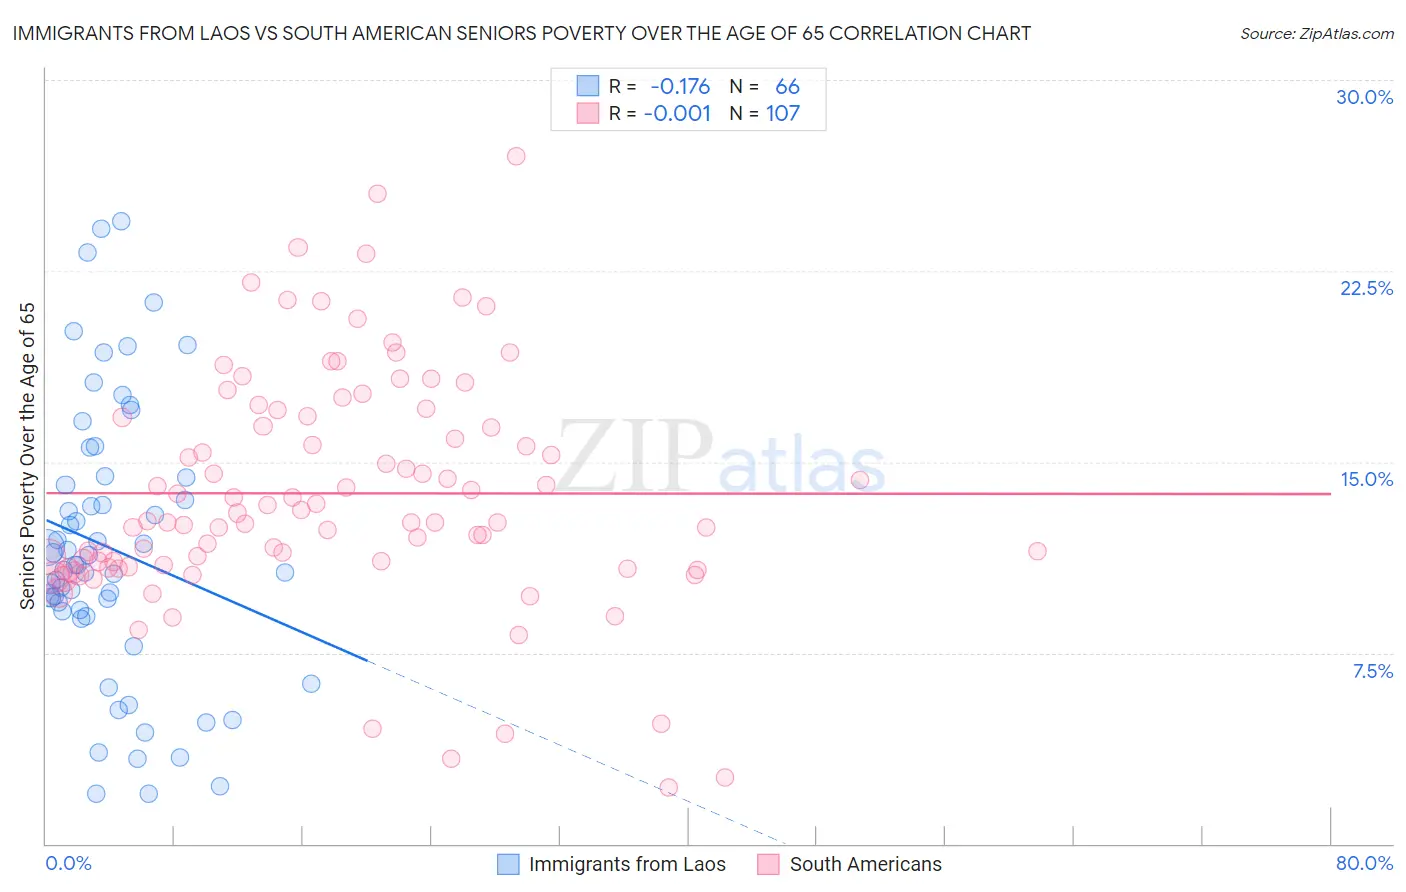 Immigrants from Laos vs South American Seniors Poverty Over the Age of 65